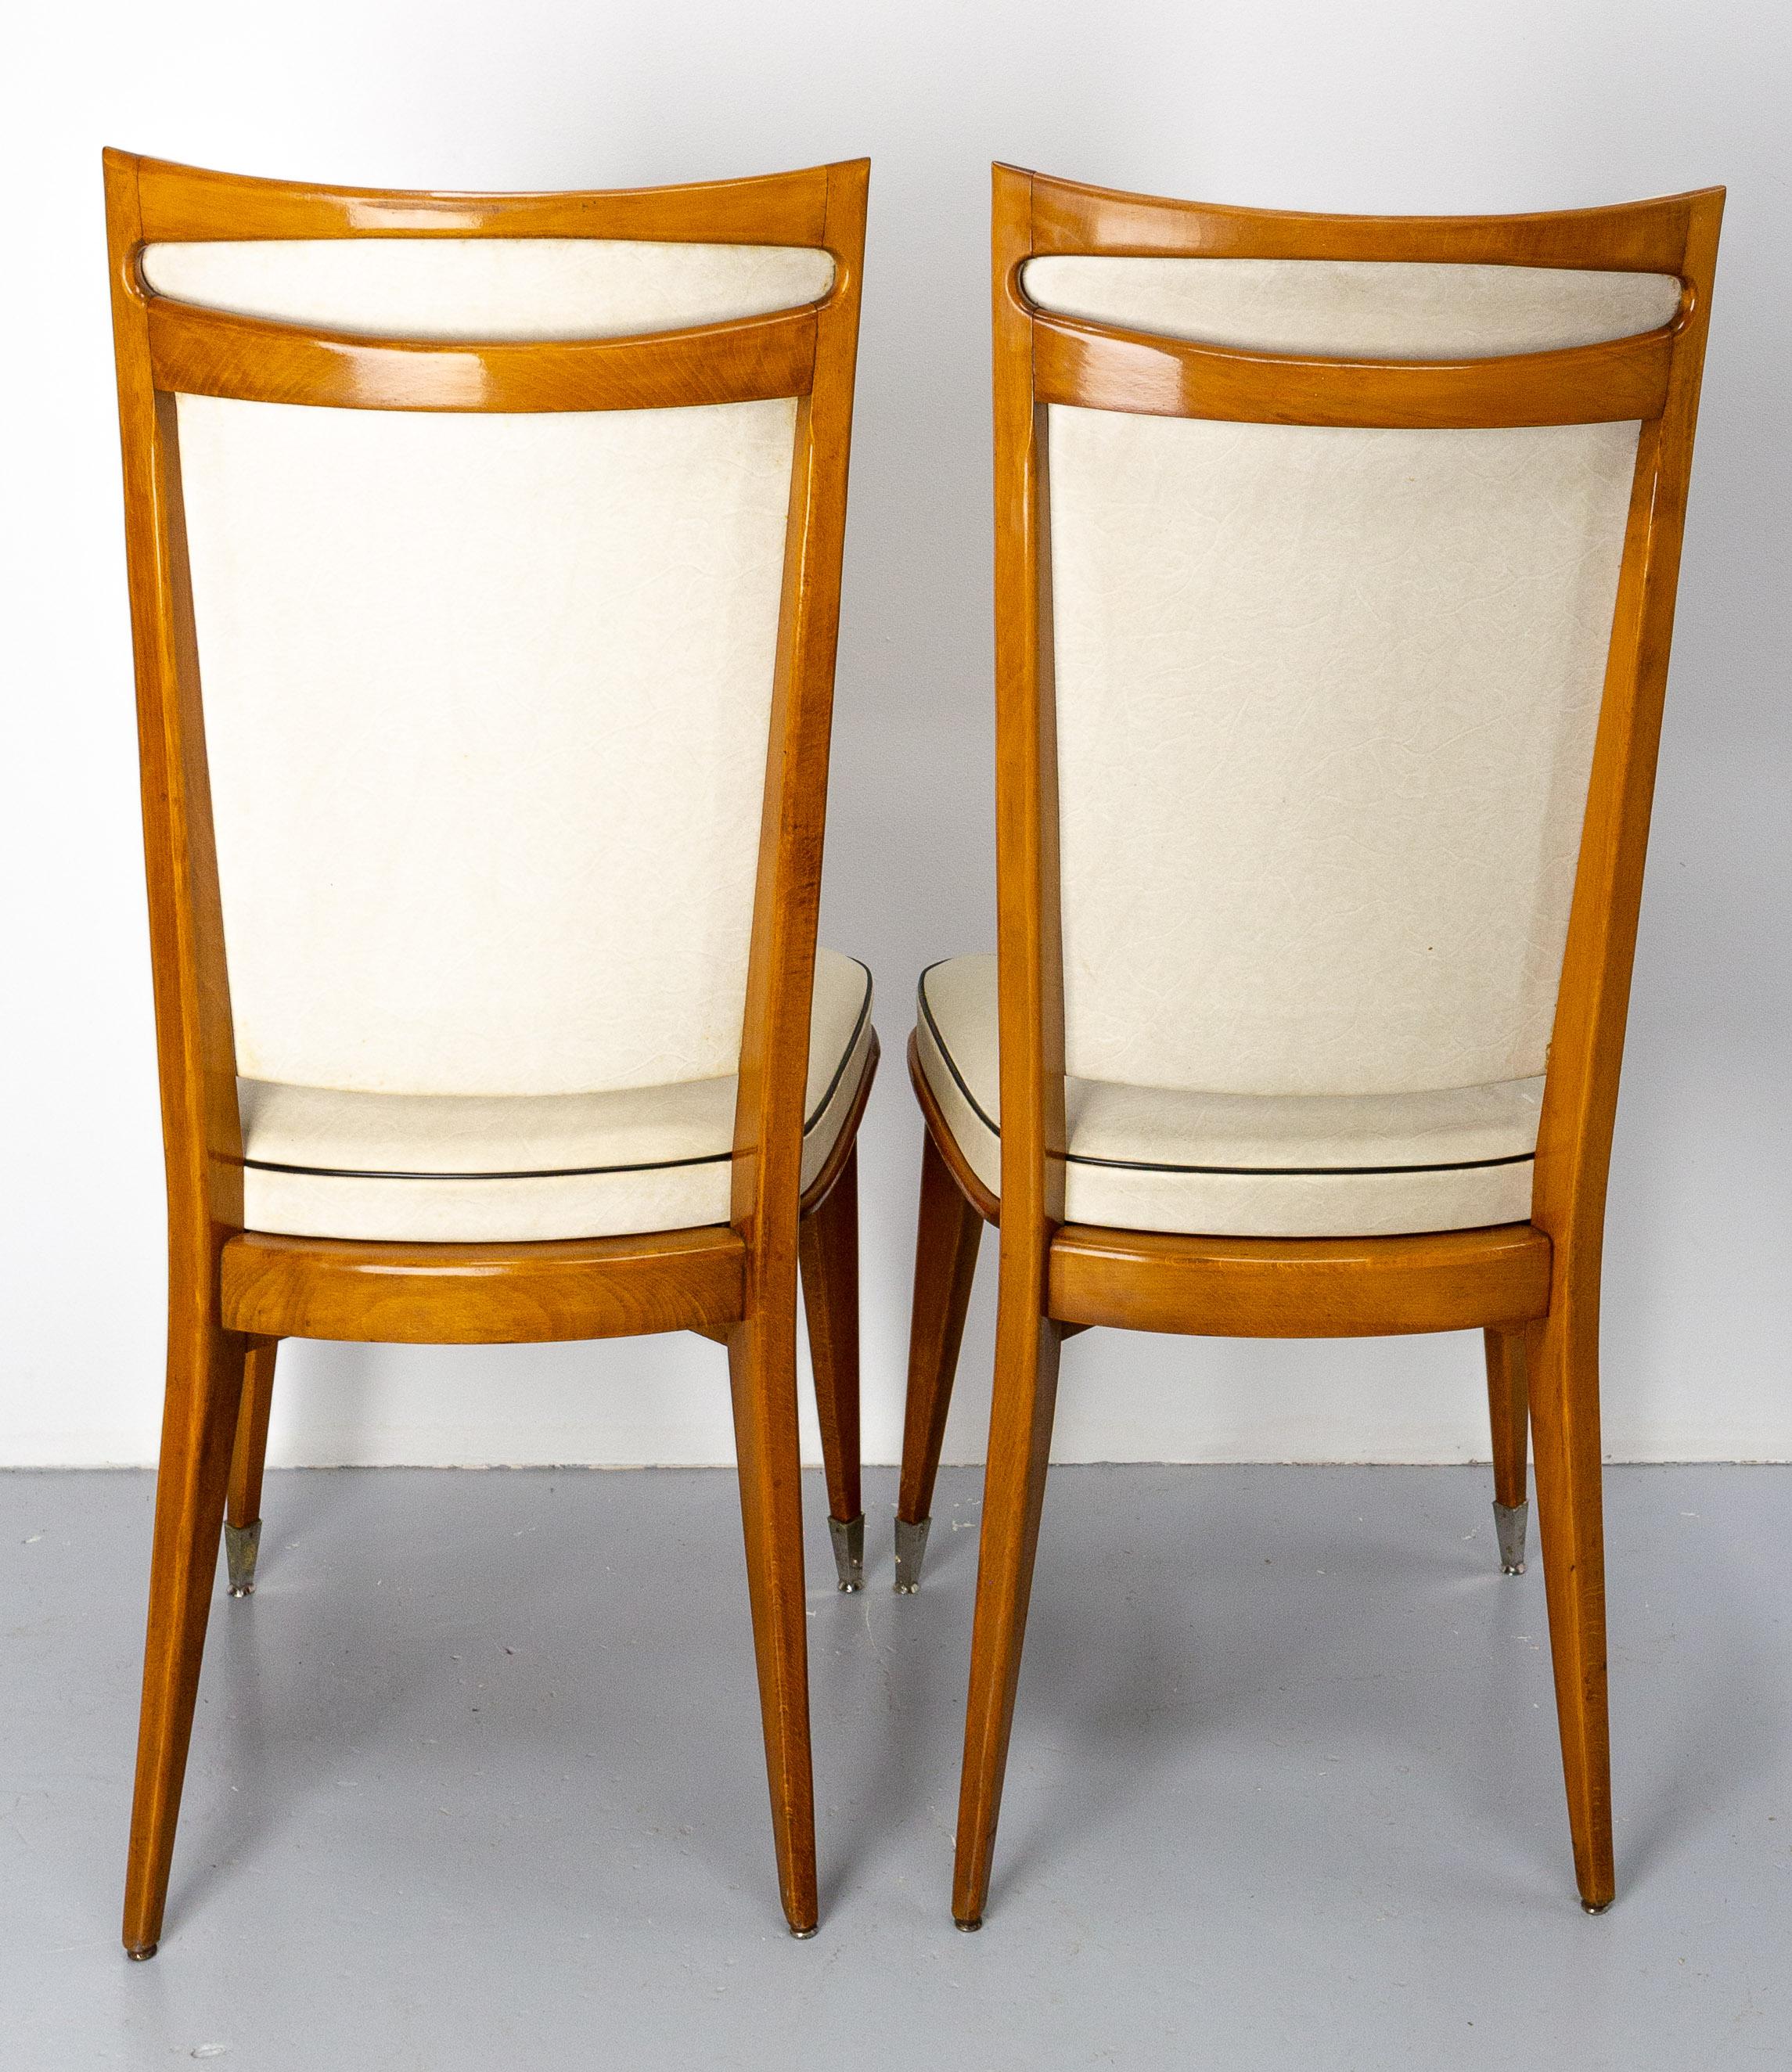 Six Dining Chairs Beech and Skai to Recover Midcentury French, circa 1950 For Sale 3